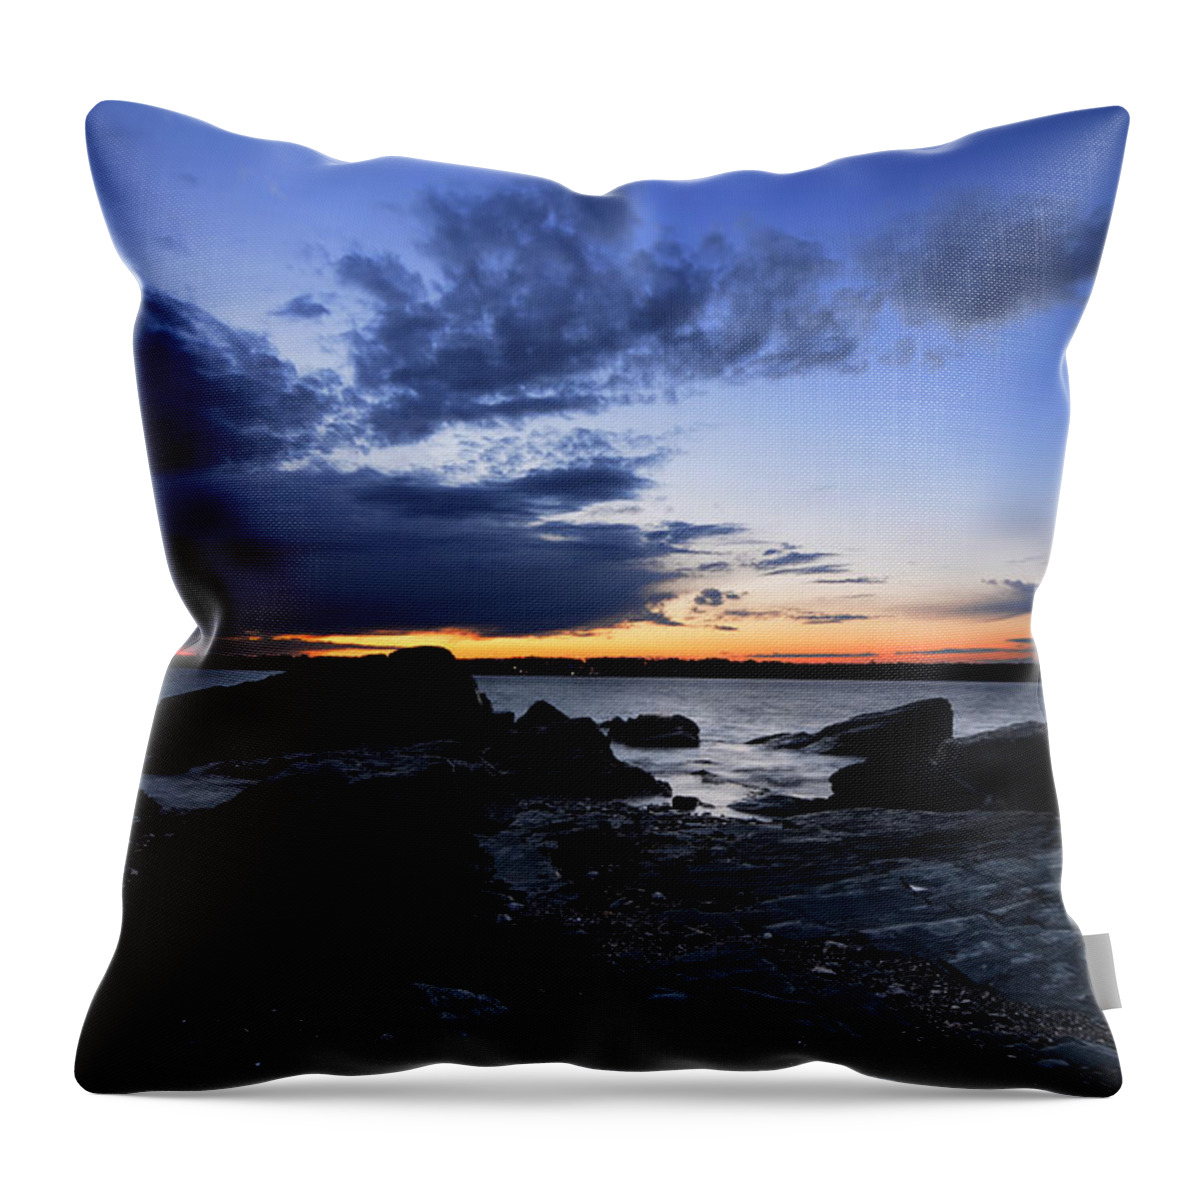 Fort Getty Park Throw Pillow featuring the photograph Sunset At Fort Getty by Lourry Legarde